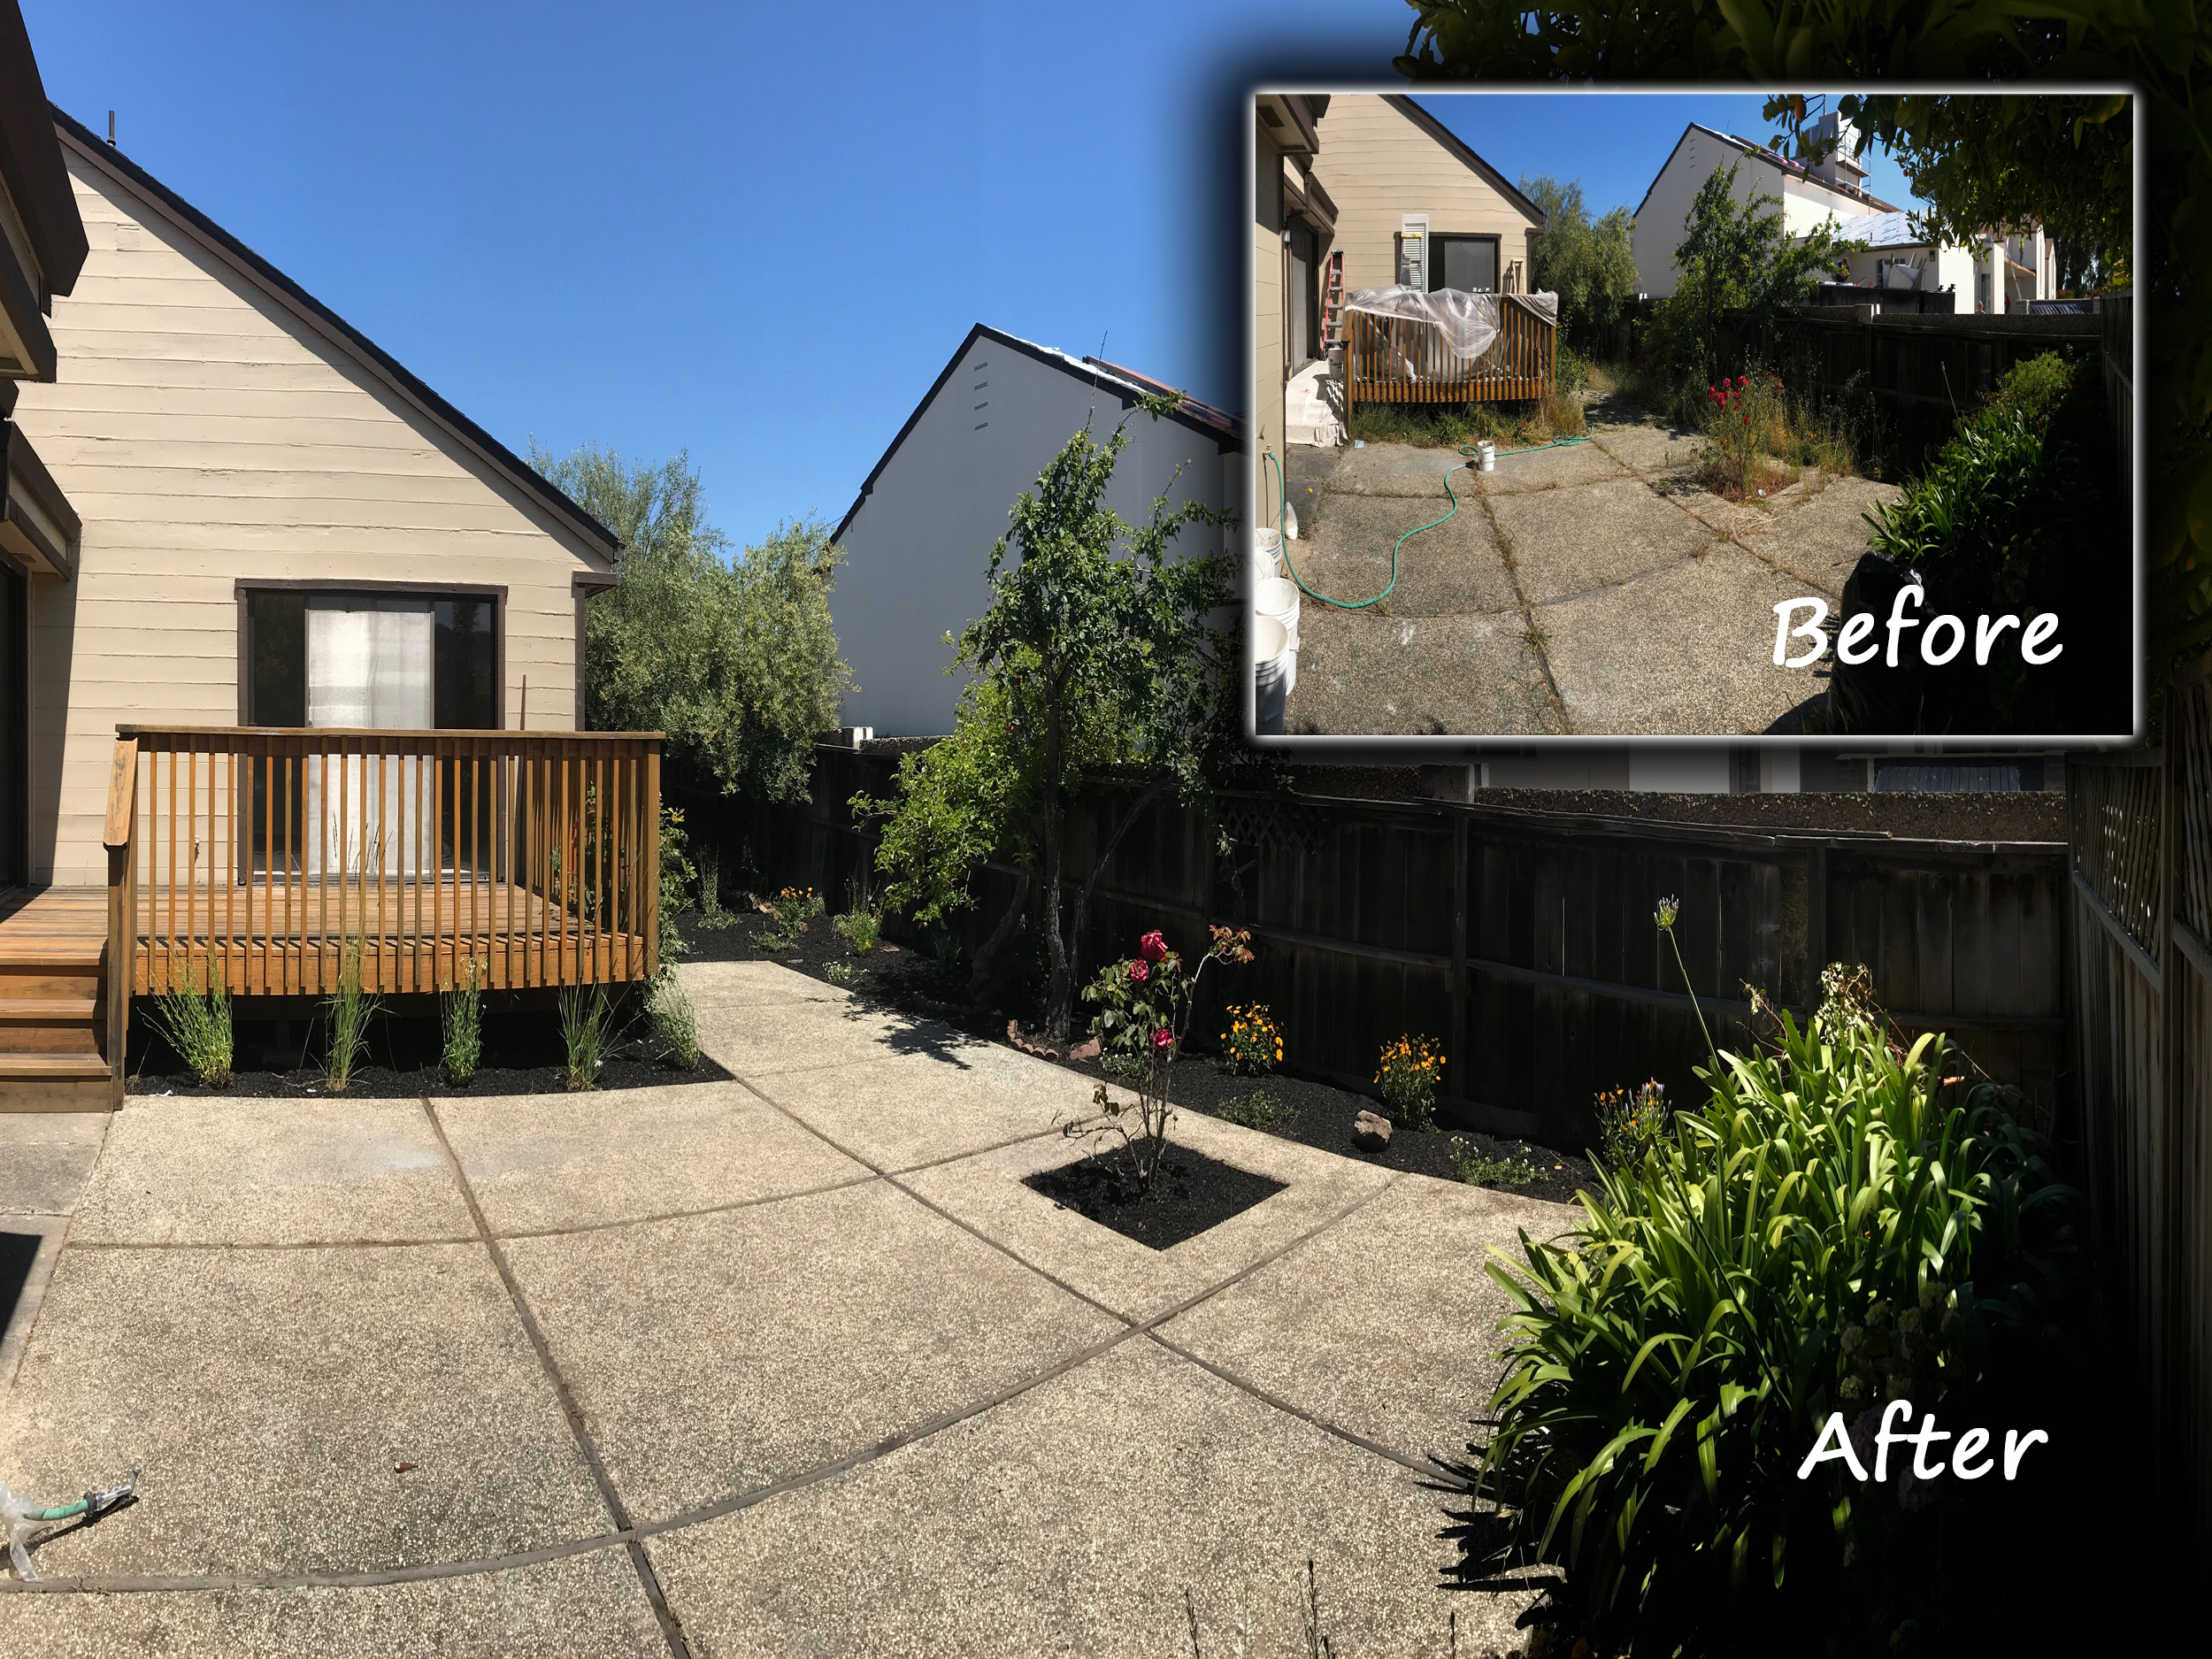 14 cypress court milbrae Before and after.jpg